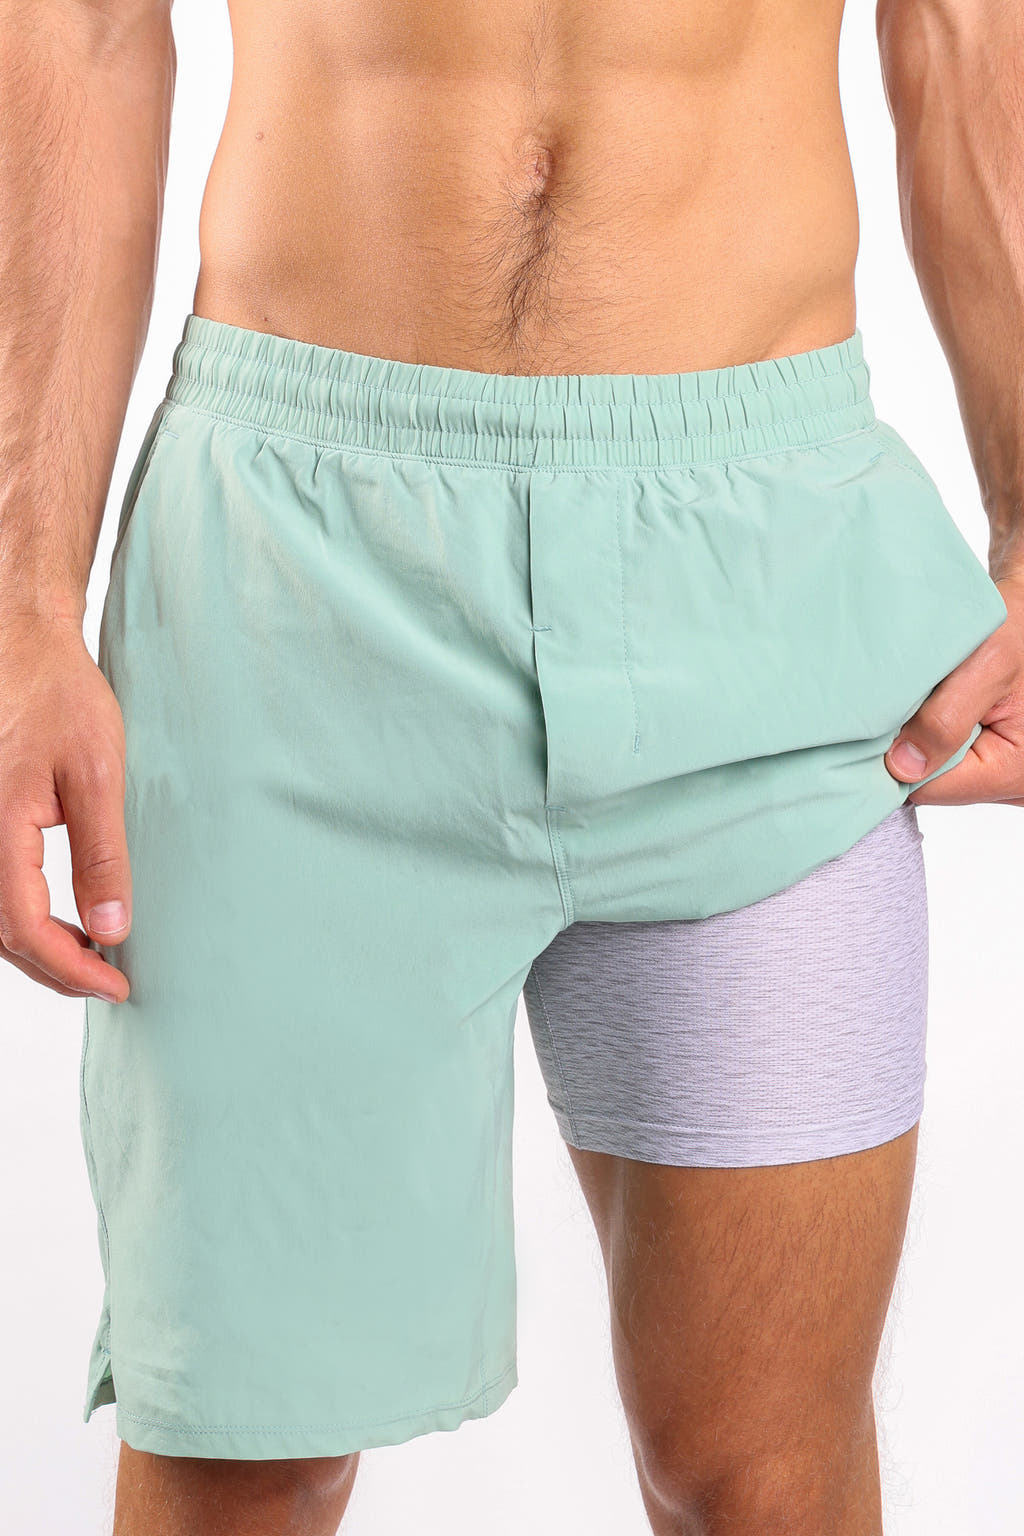 The Concrete Jungle | Sage Ball Hammock® 9 Inch Athletic Shorts